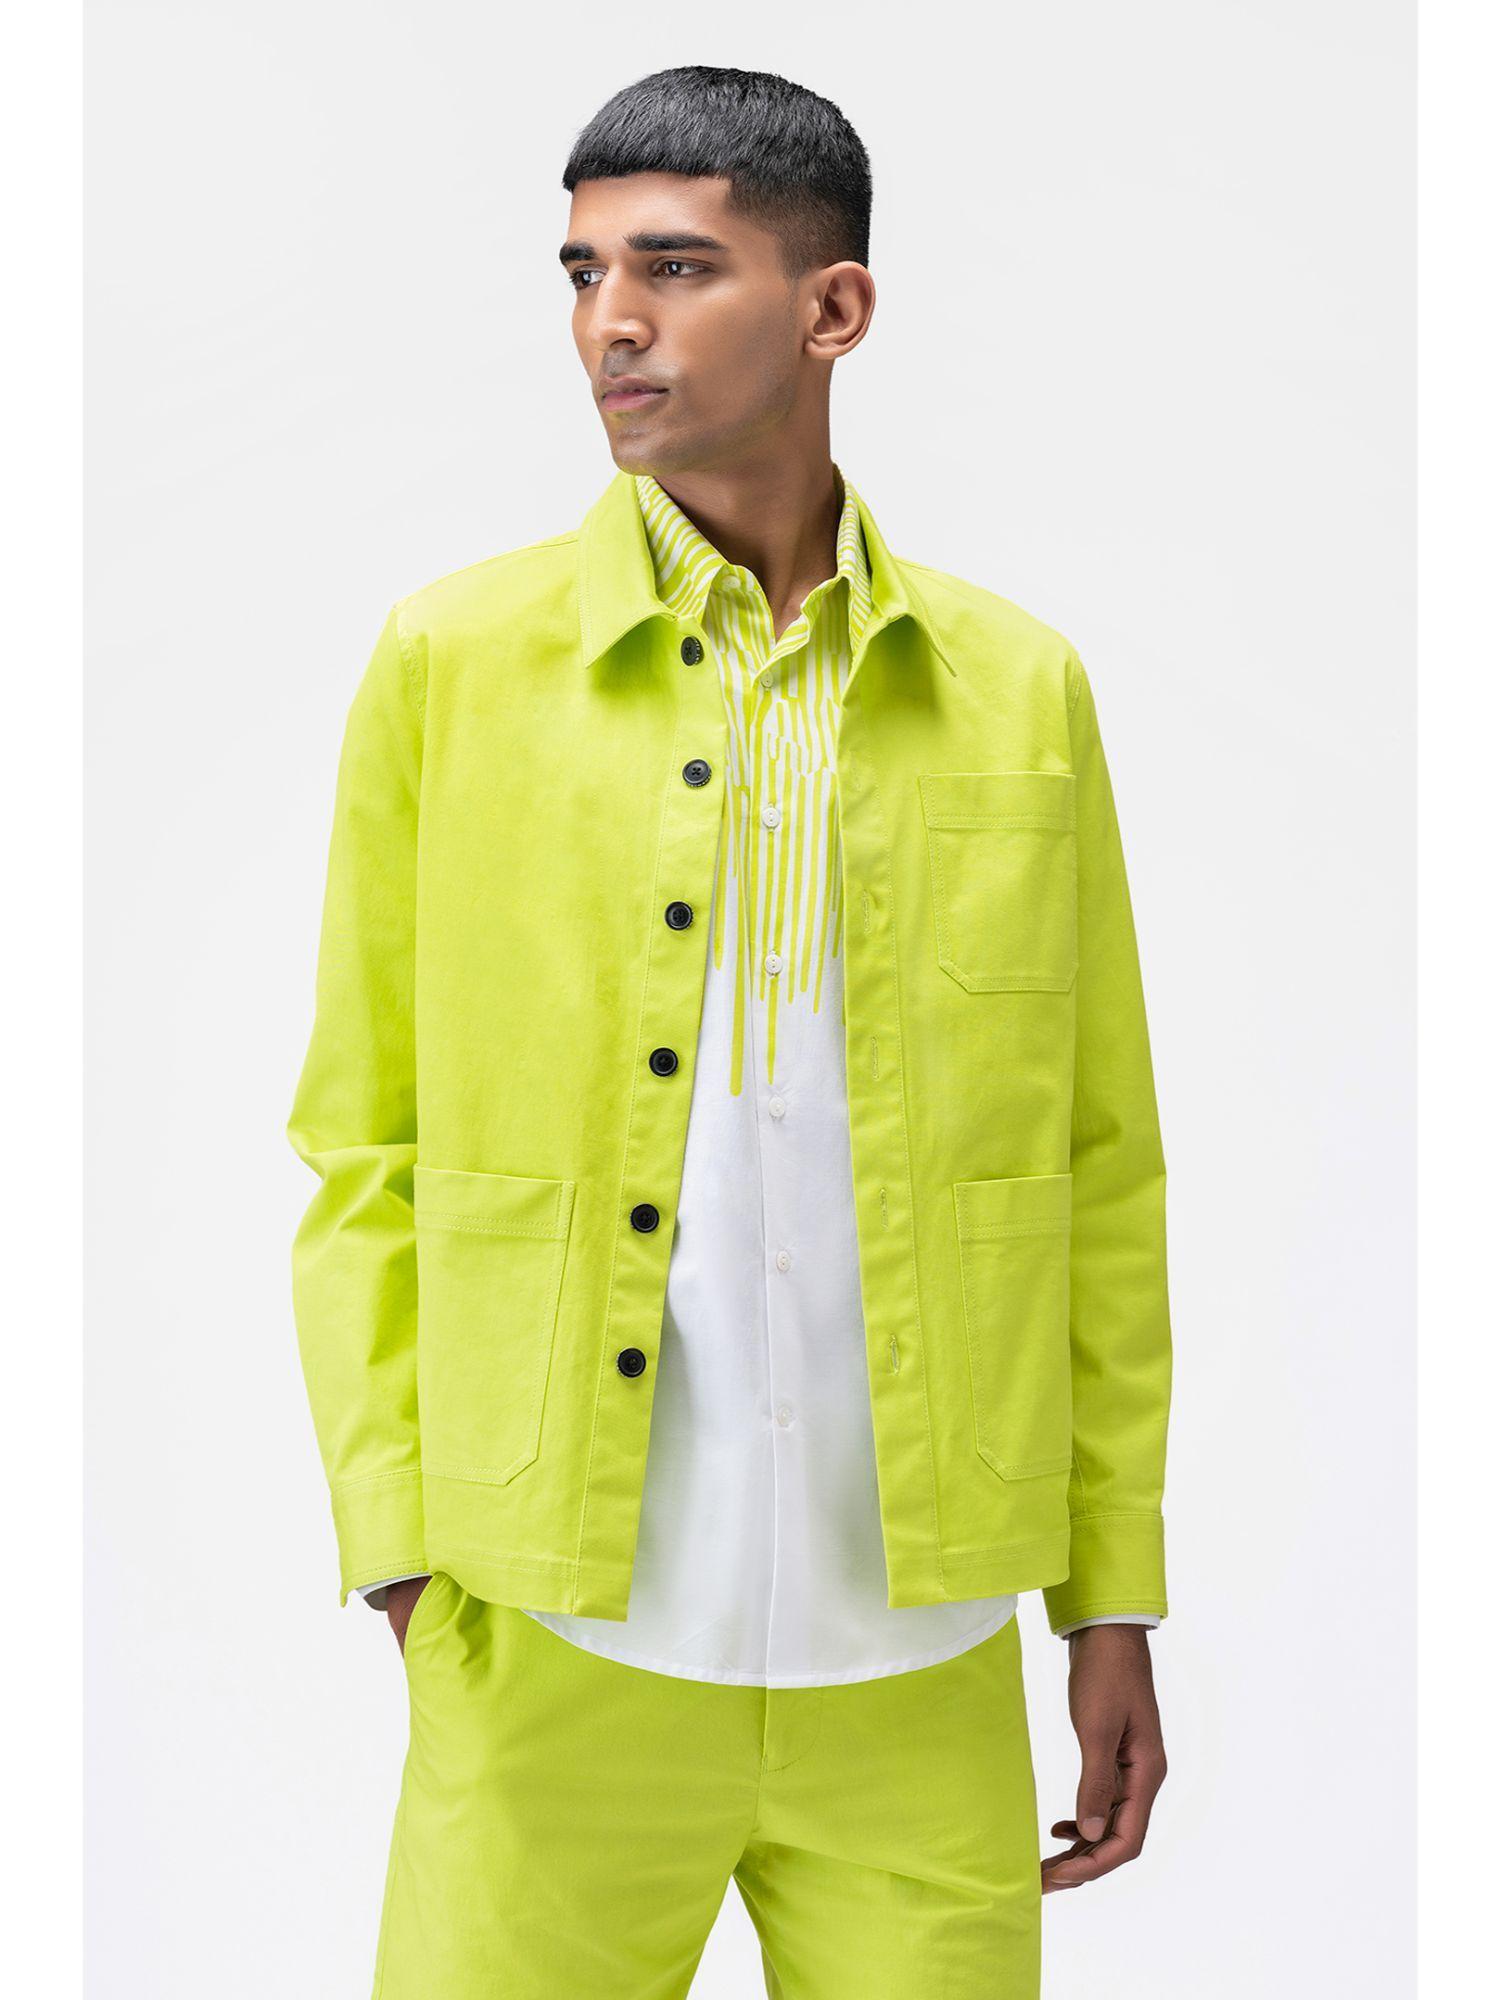 lime green mens jacket with patch pocket